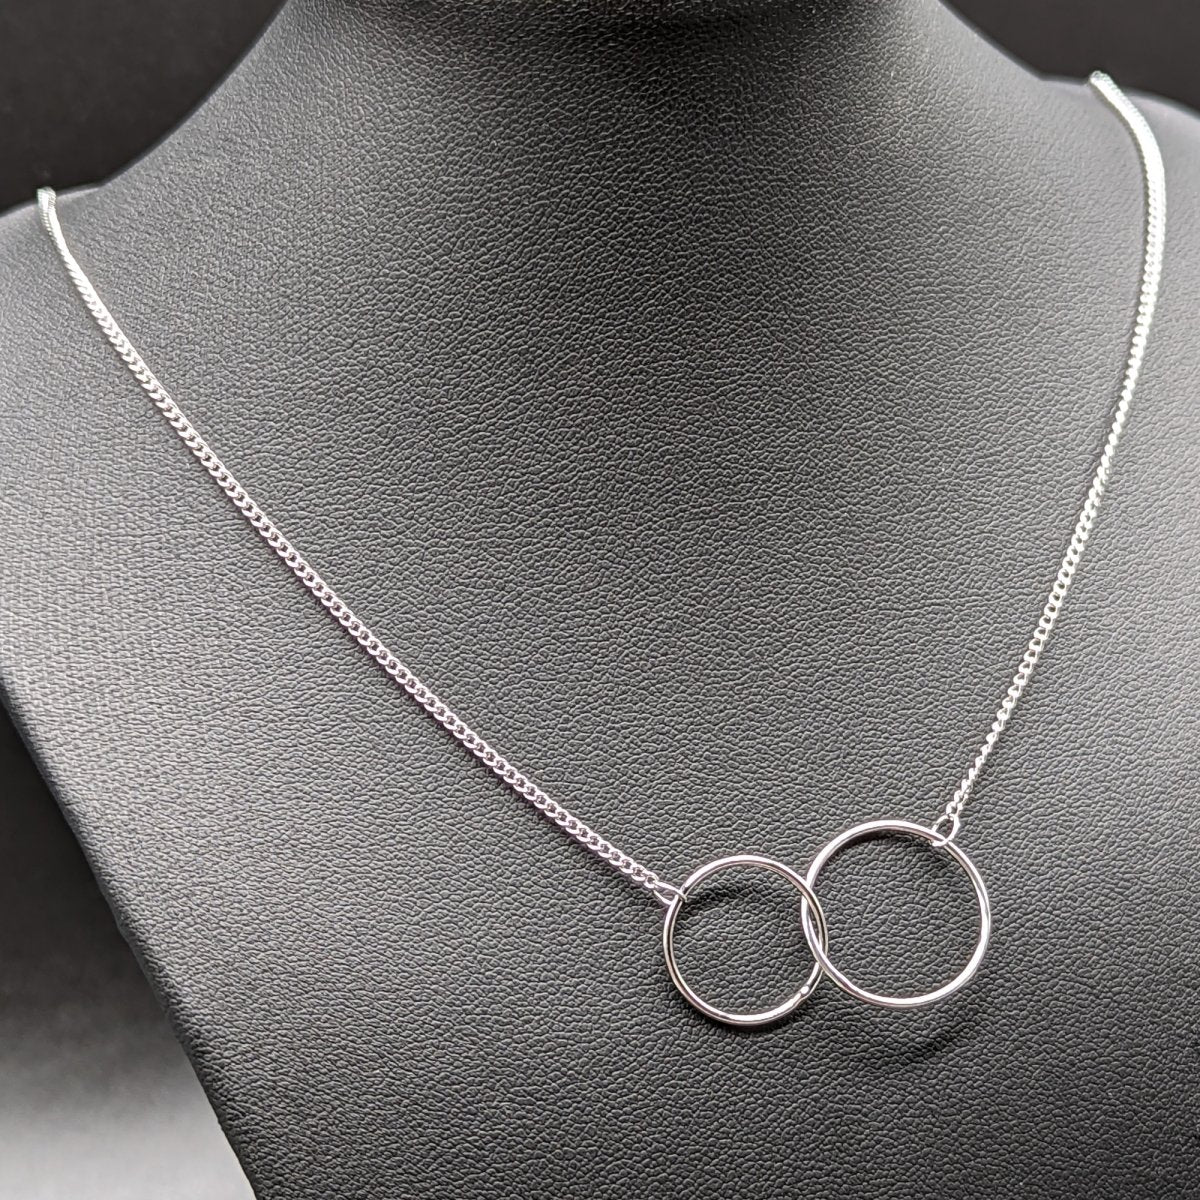 Masters Degree Gift - Interlocking Circles Necklace Silver or 14k Gold - Meaningful Cards